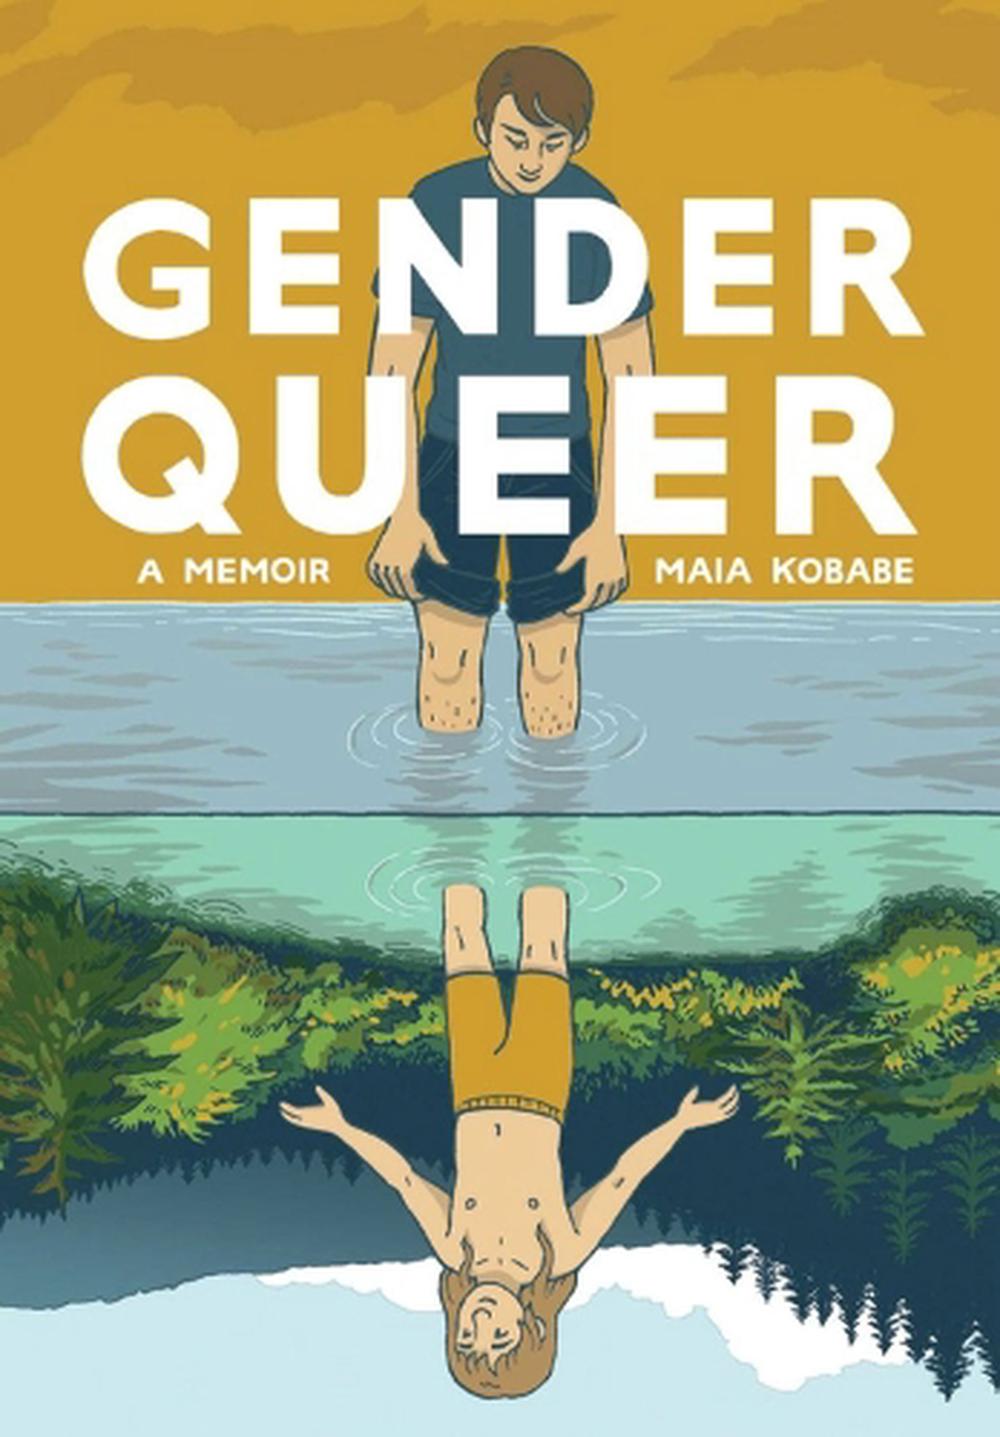 Gender Queer a Memoir by Maia Kobabe (English) Paperback Book Free